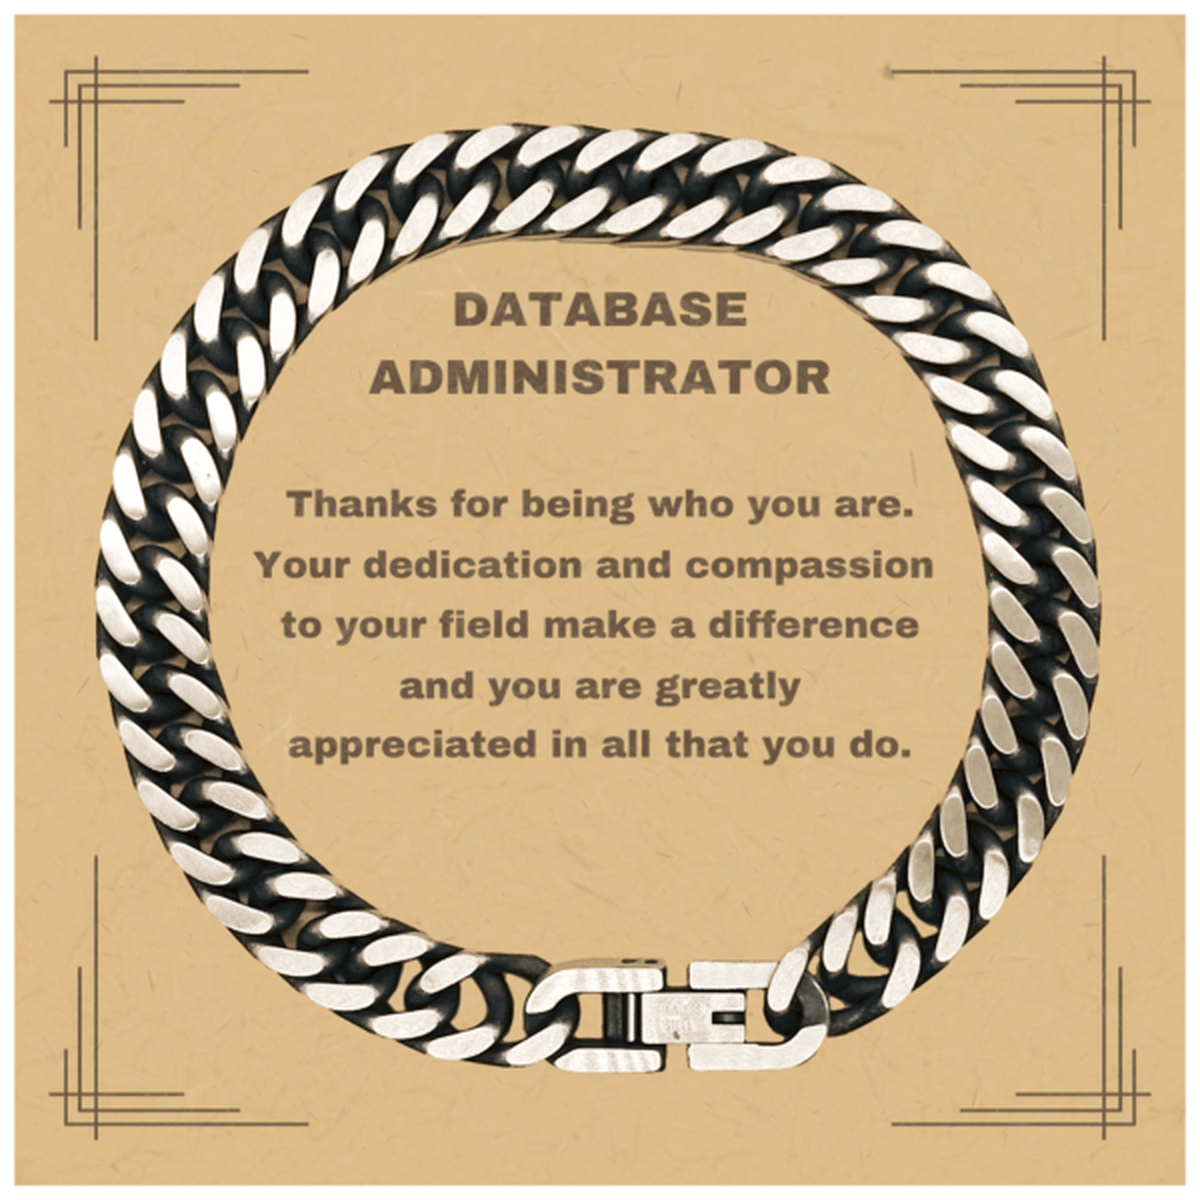 Database Administrator Cuban Chain Link Bracelet - Thanks for being who you are - Birthday Christmas Jewelry Gifts Coworkers Colleague Boss - Mallard Moon Gift Shop